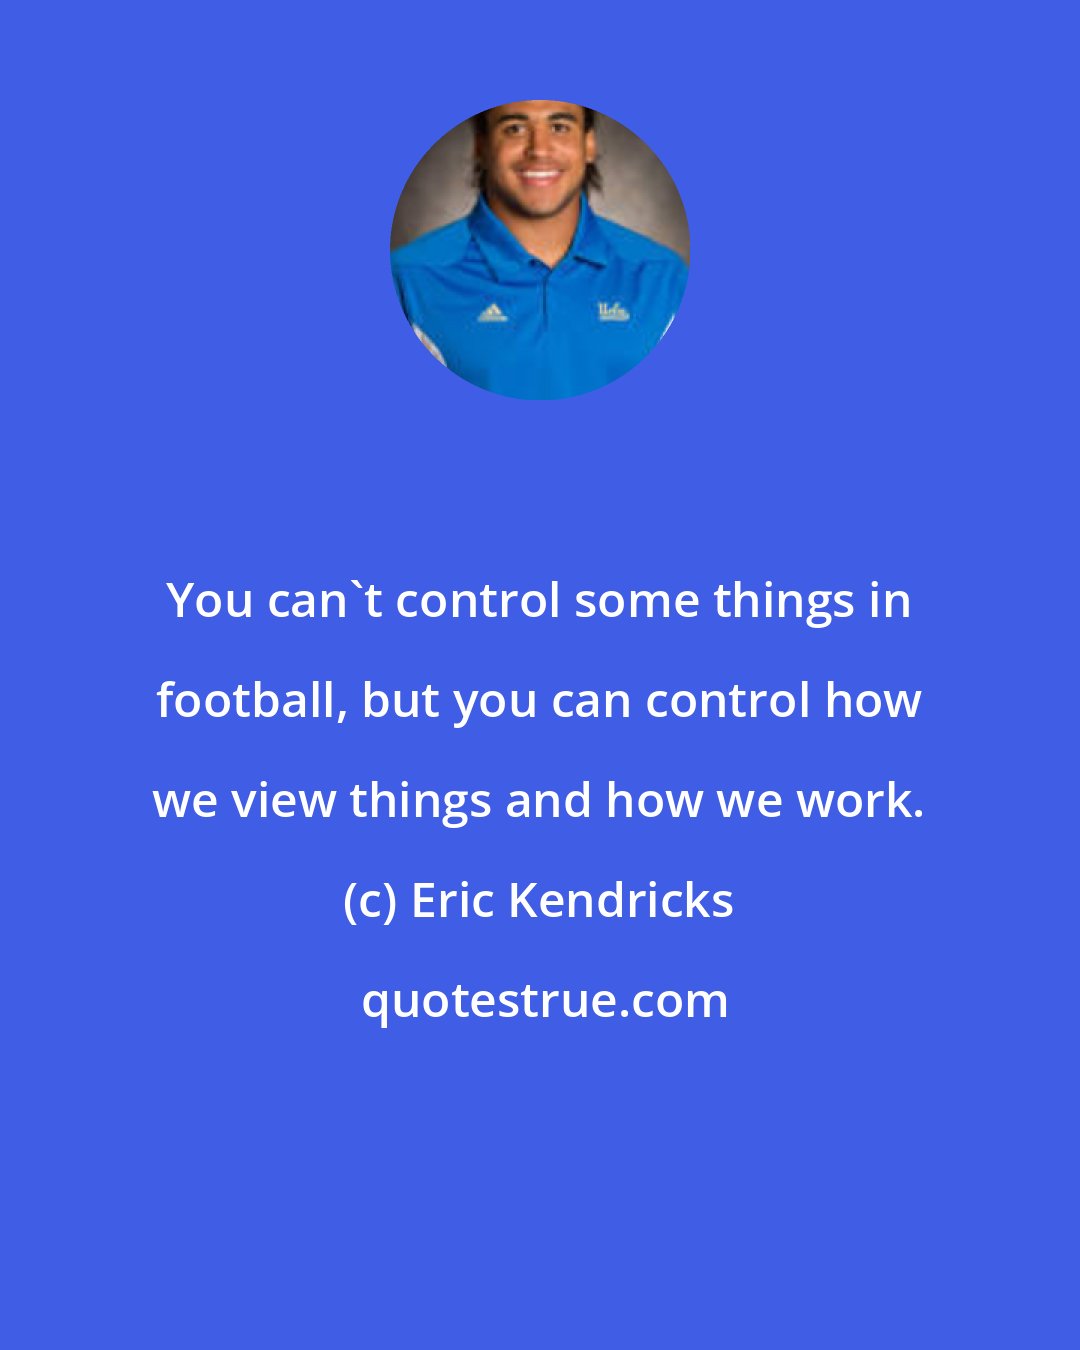 Eric Kendricks: You can't control some things in football, but you can control how we view things and how we work.